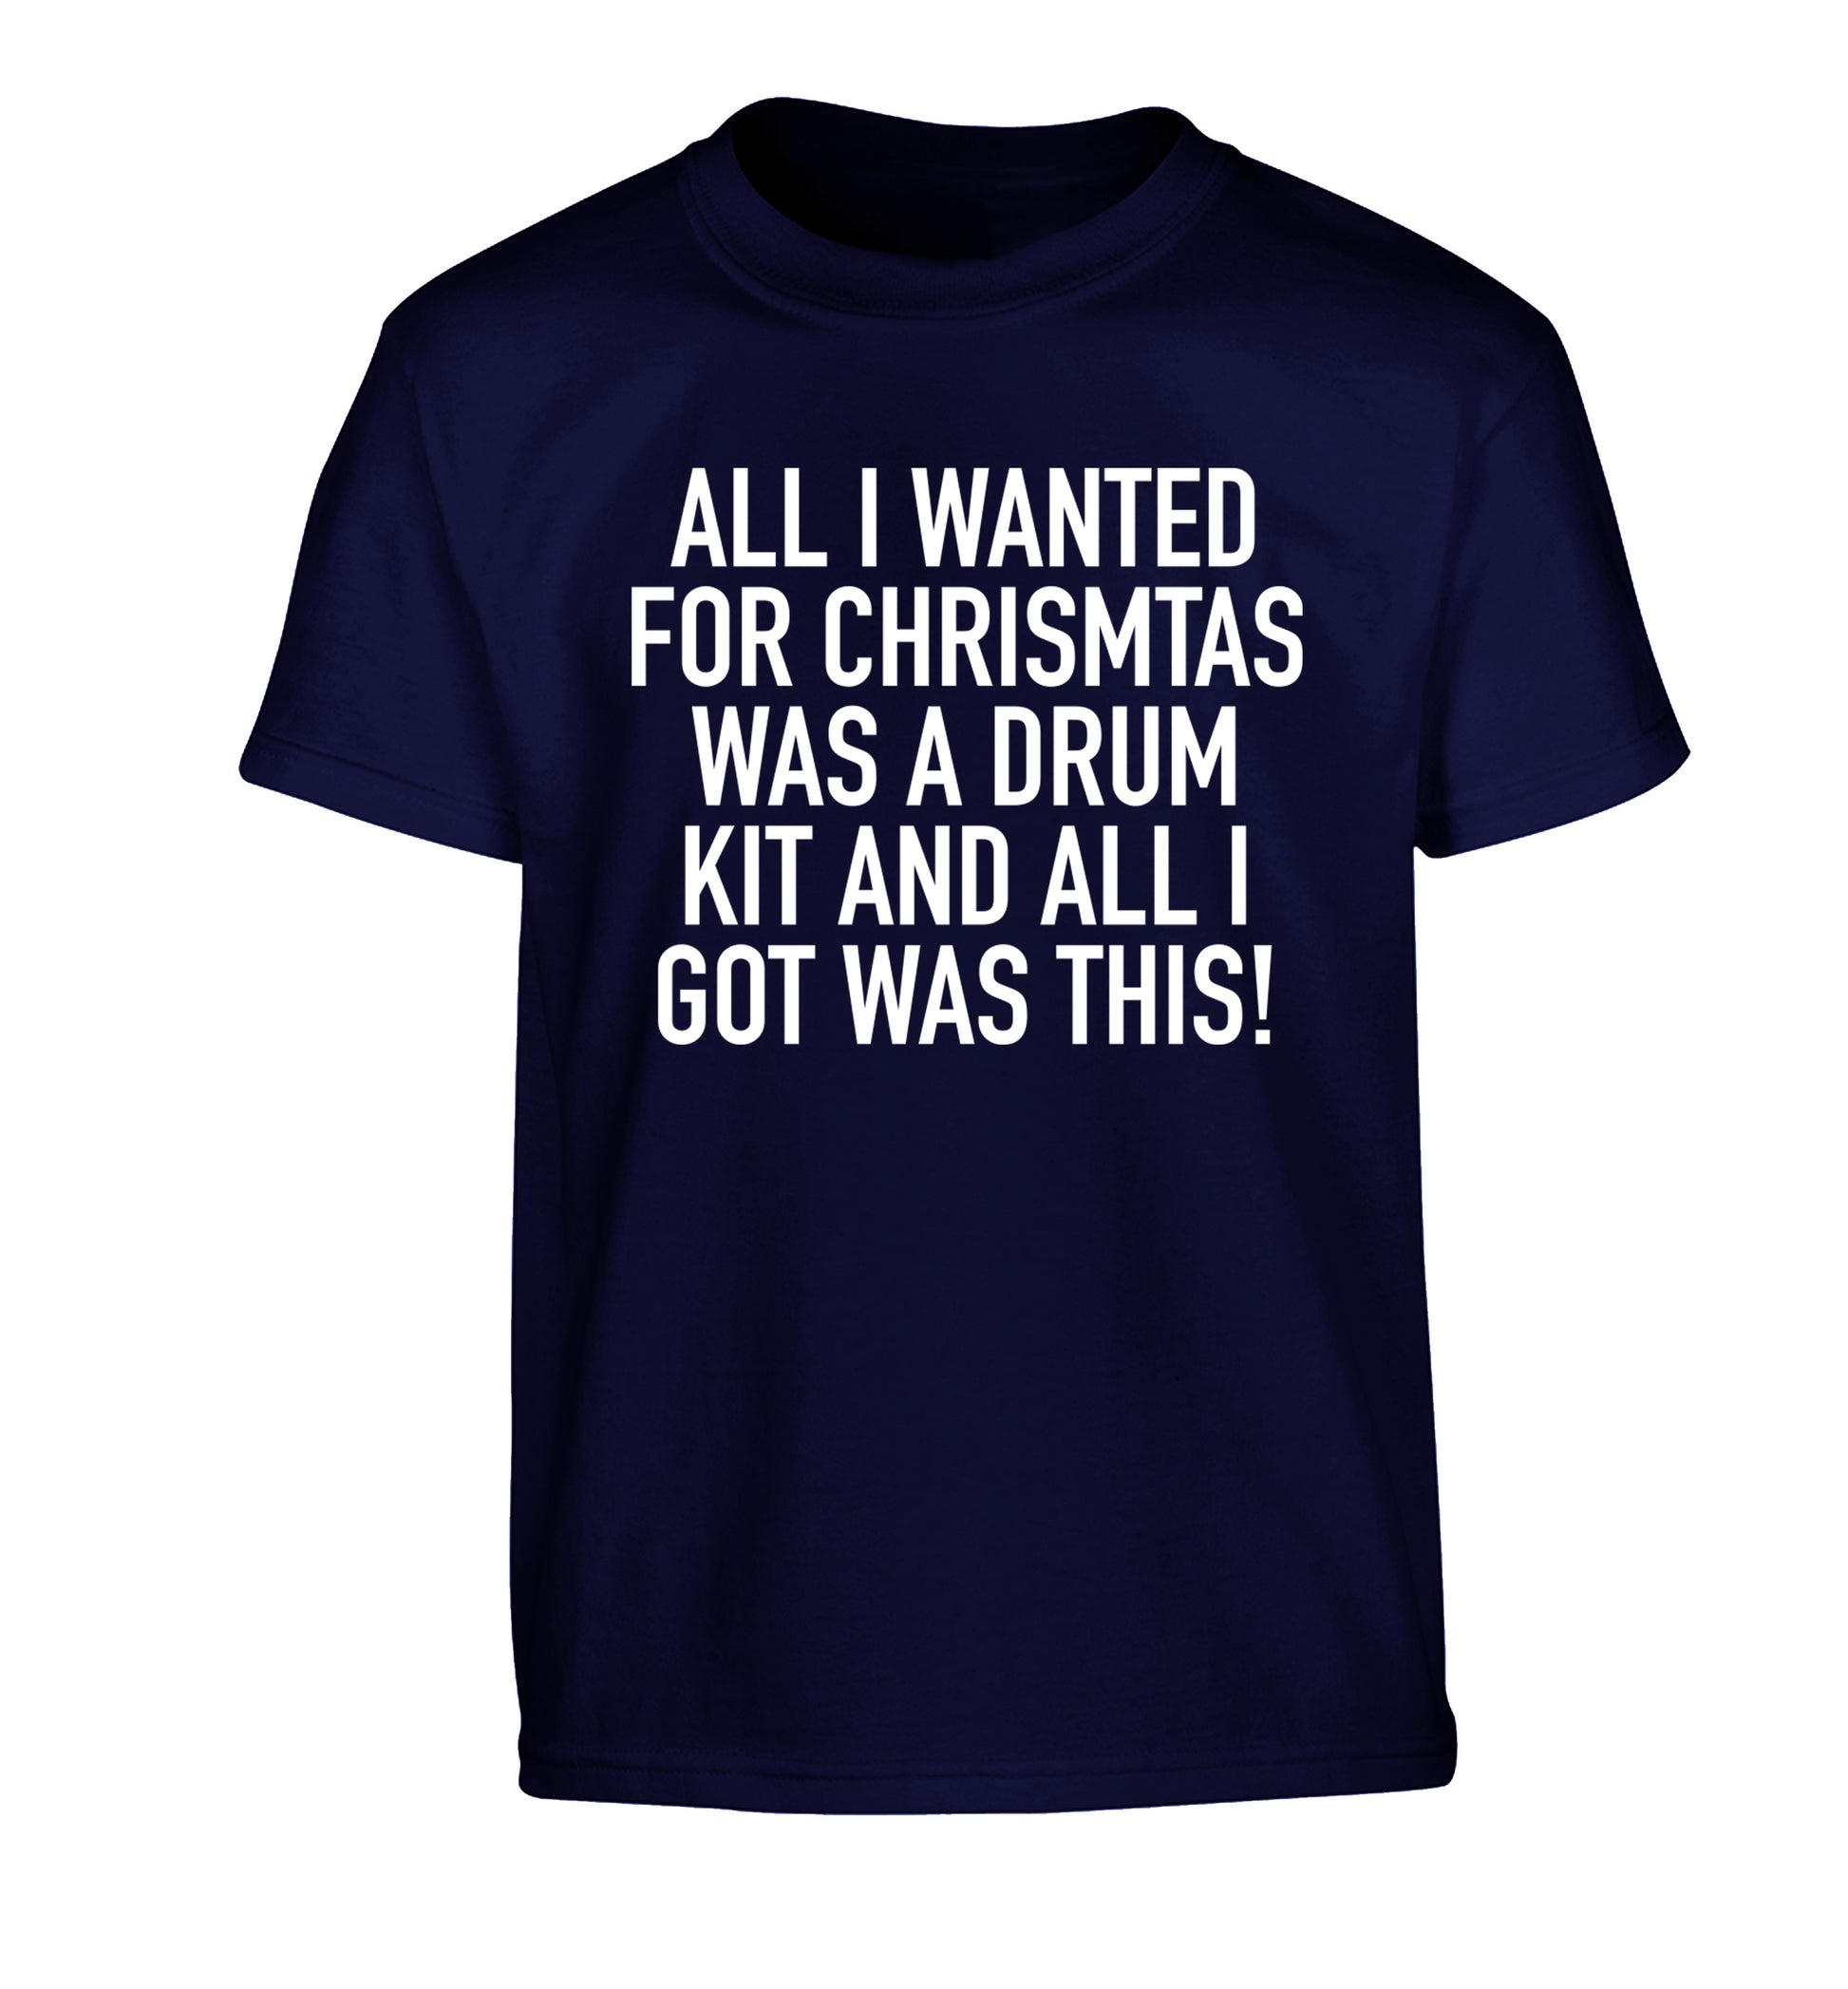 All I wanted for Christmas was a drum kit and all I got was this! Children's navy Tshirt 12-14 Years